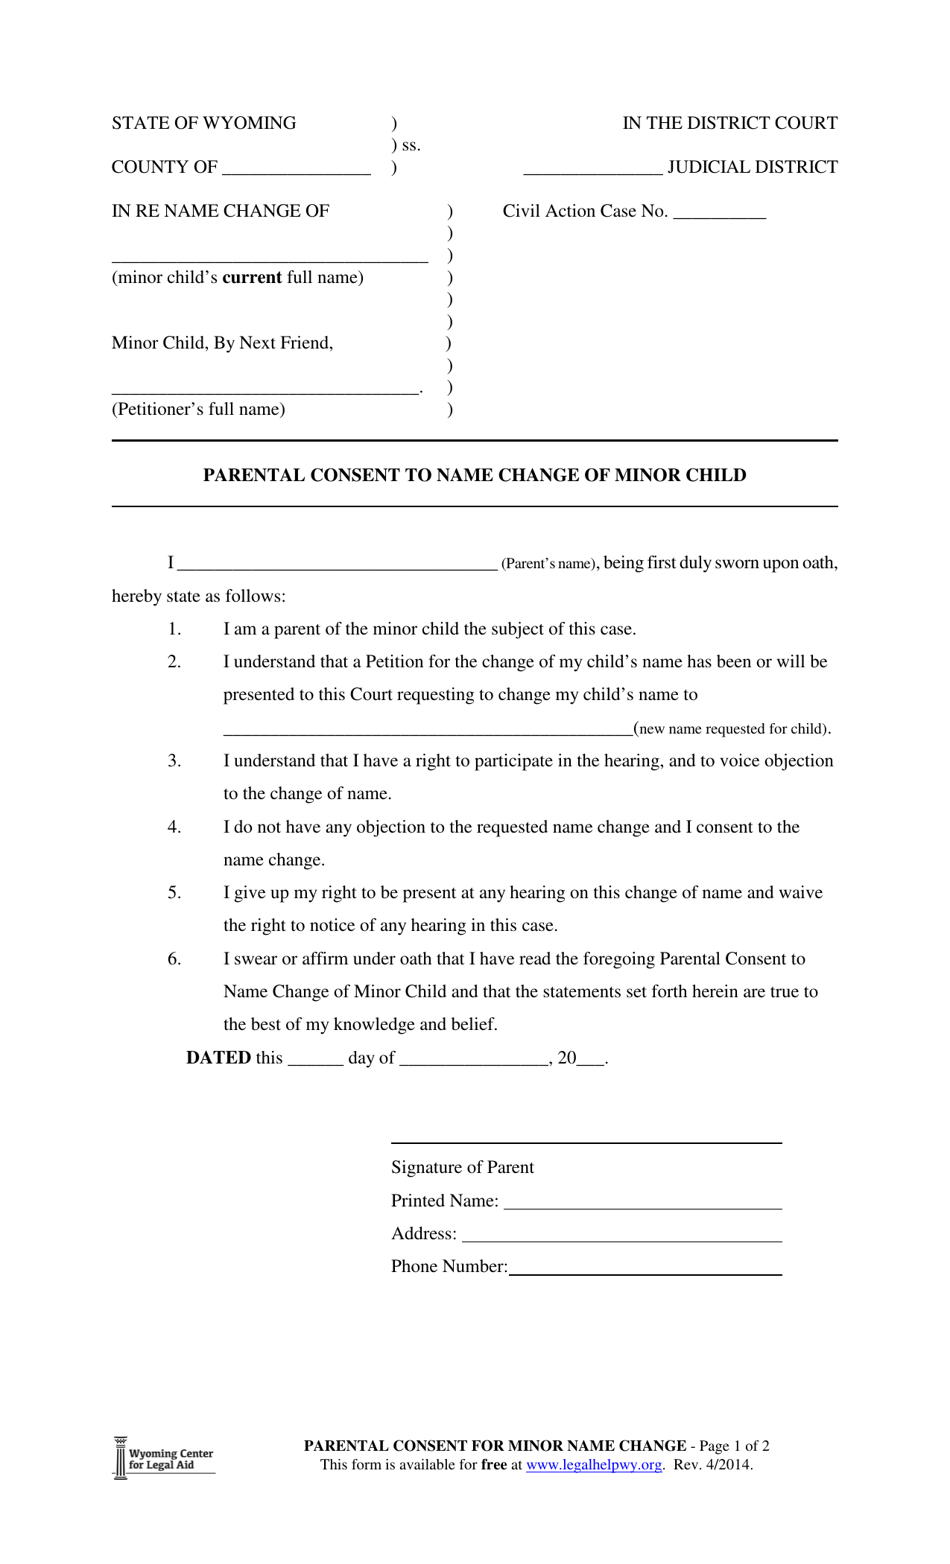 Parental Consent to Name Change of Minor Child - Wyoming, Page 1